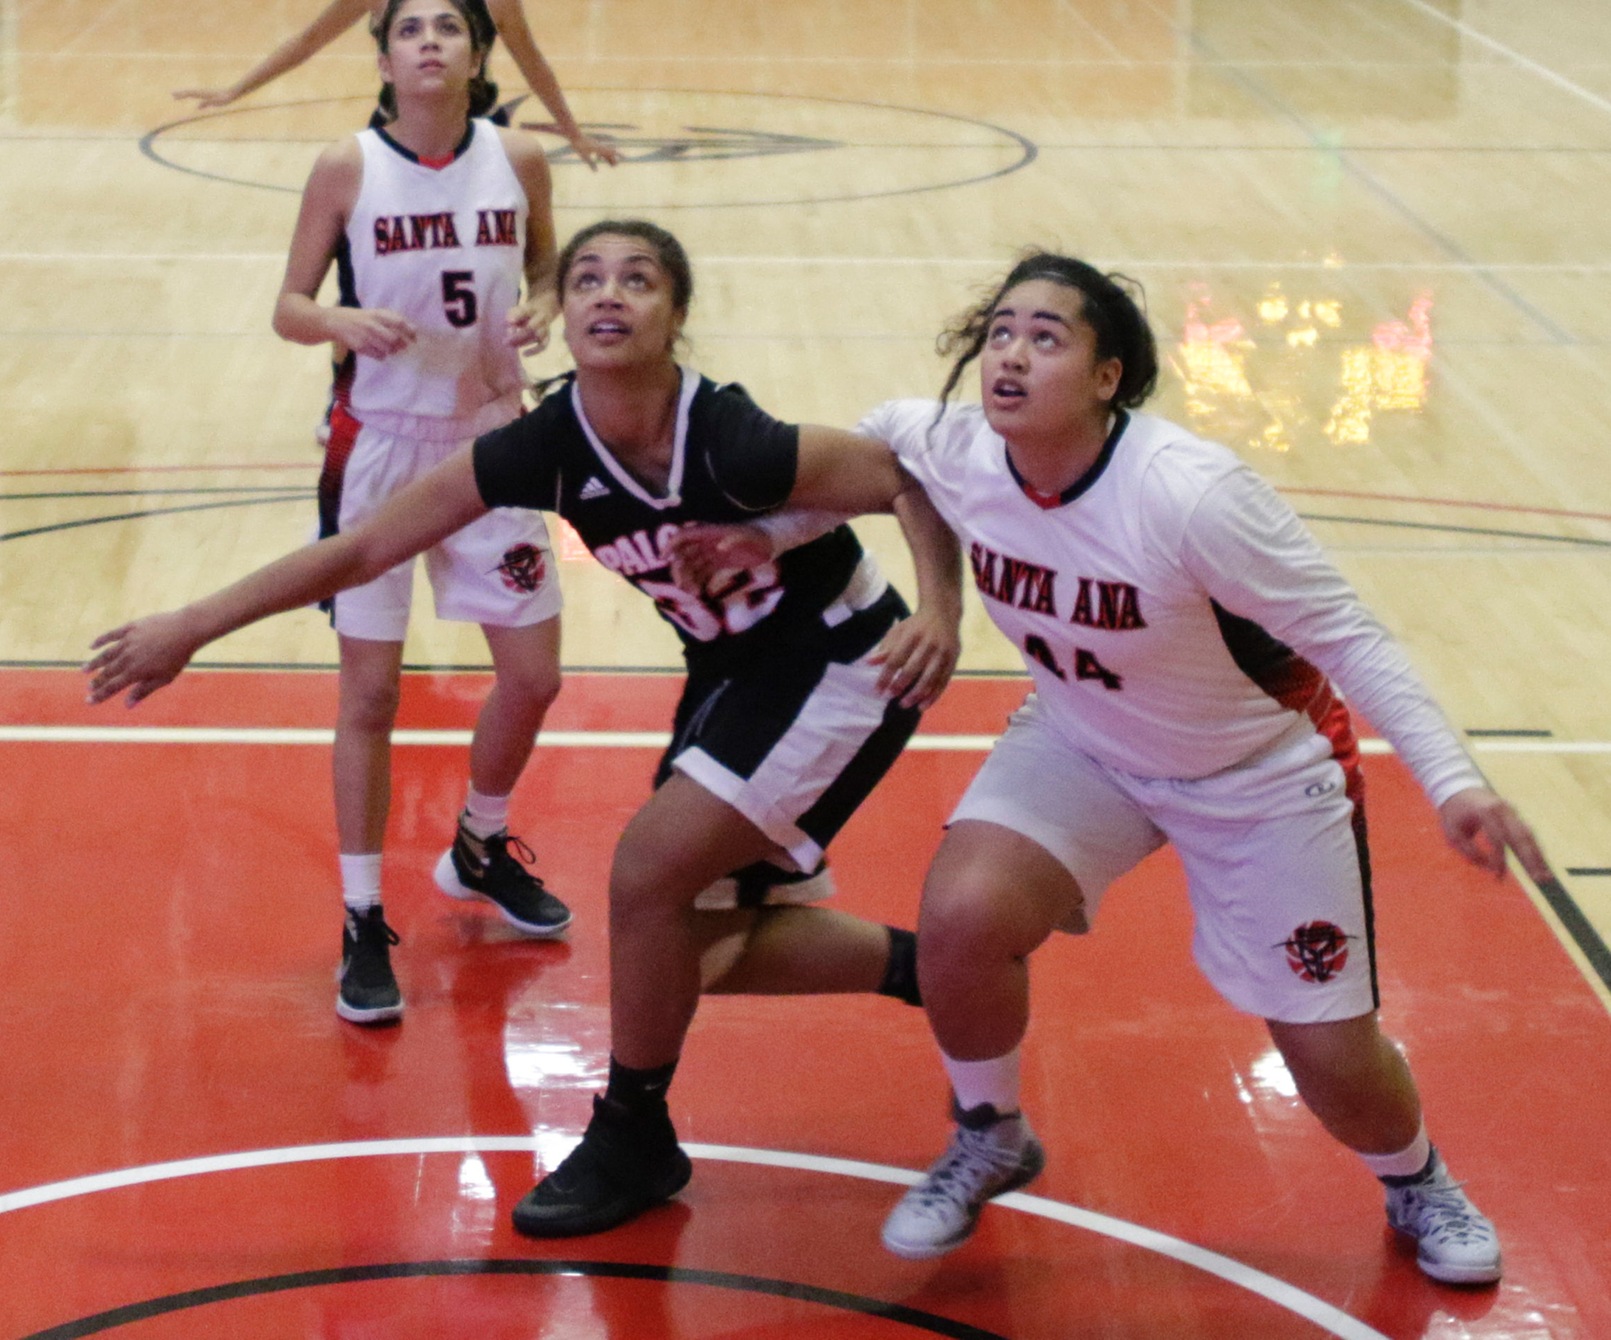 Amy Talavou led the Dons to their win with 20 points on the board and had 5 rebounds.